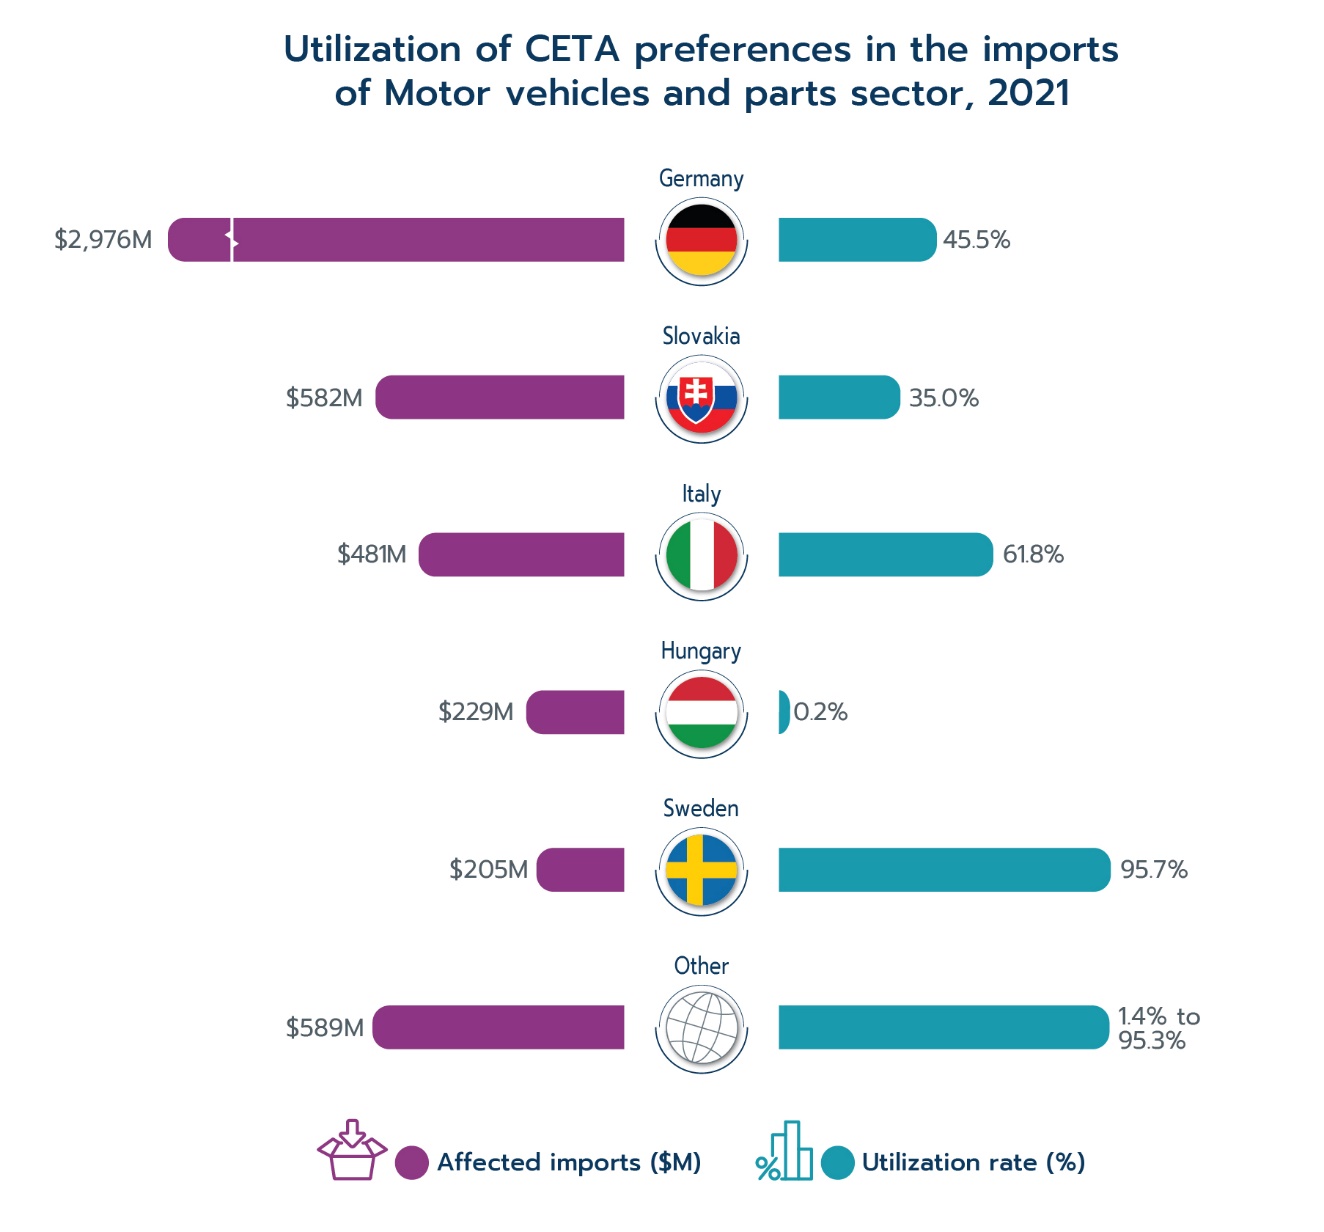 Utilization of CETA preferences in the imports of Motor vehicles and parts, 2021